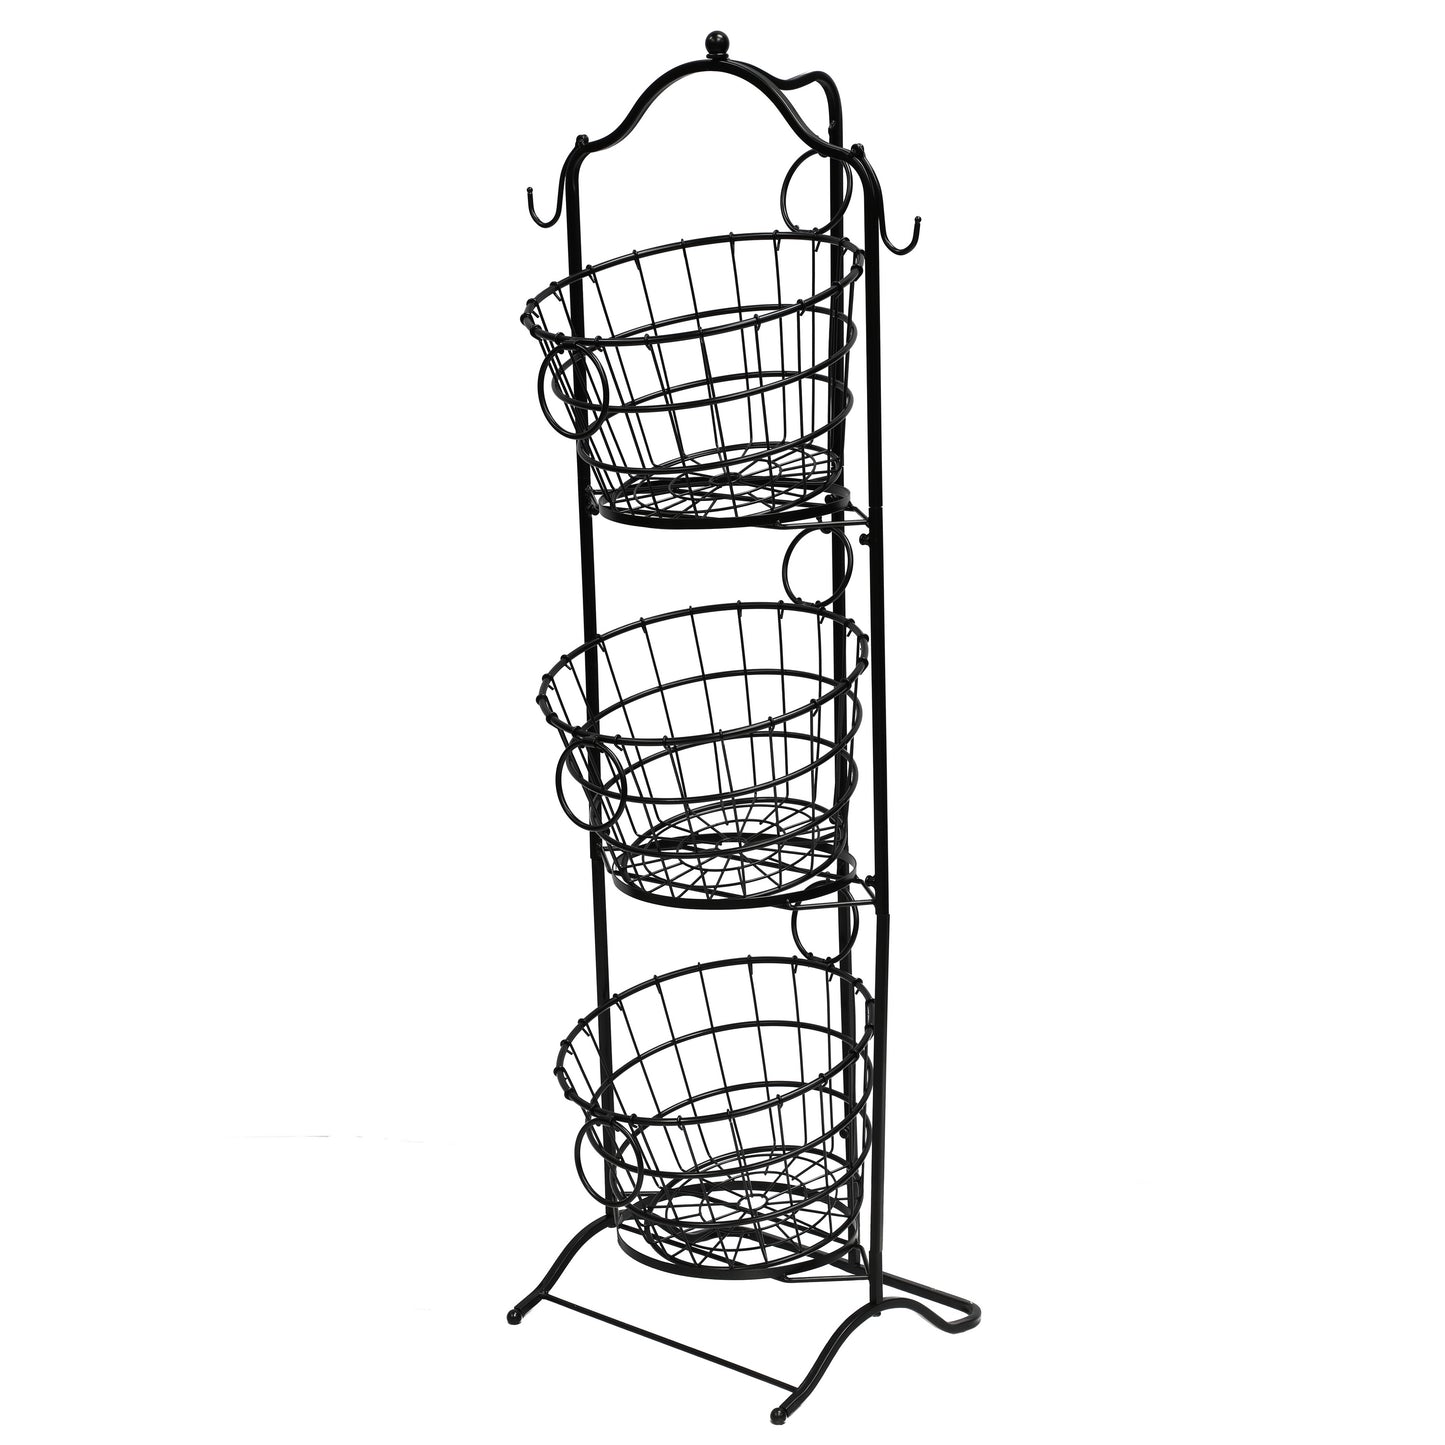 3-Tier Wire Basket with Removable Tilted Baskets